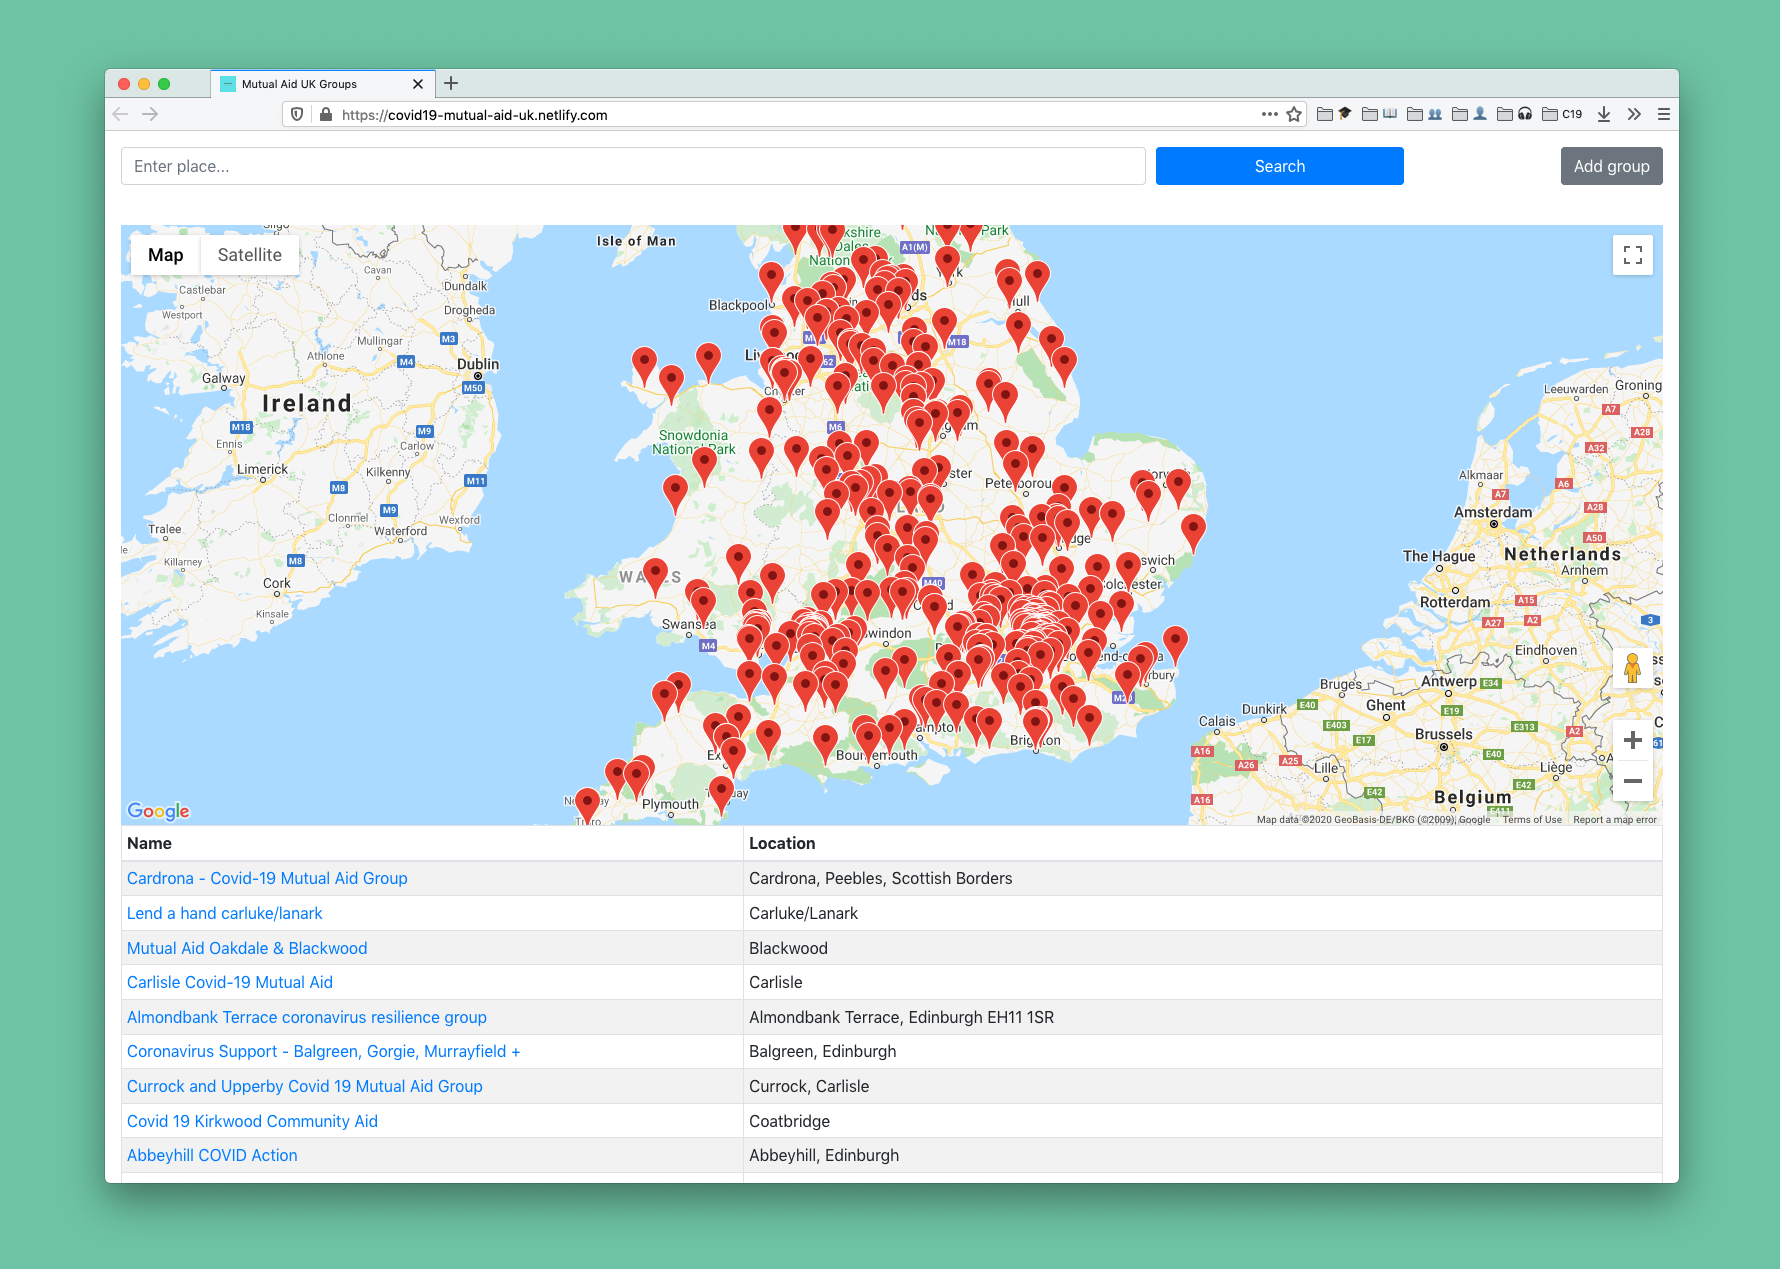 Image of browser screen with a map full of red markers. There is a table underneath that lists volunteer groups